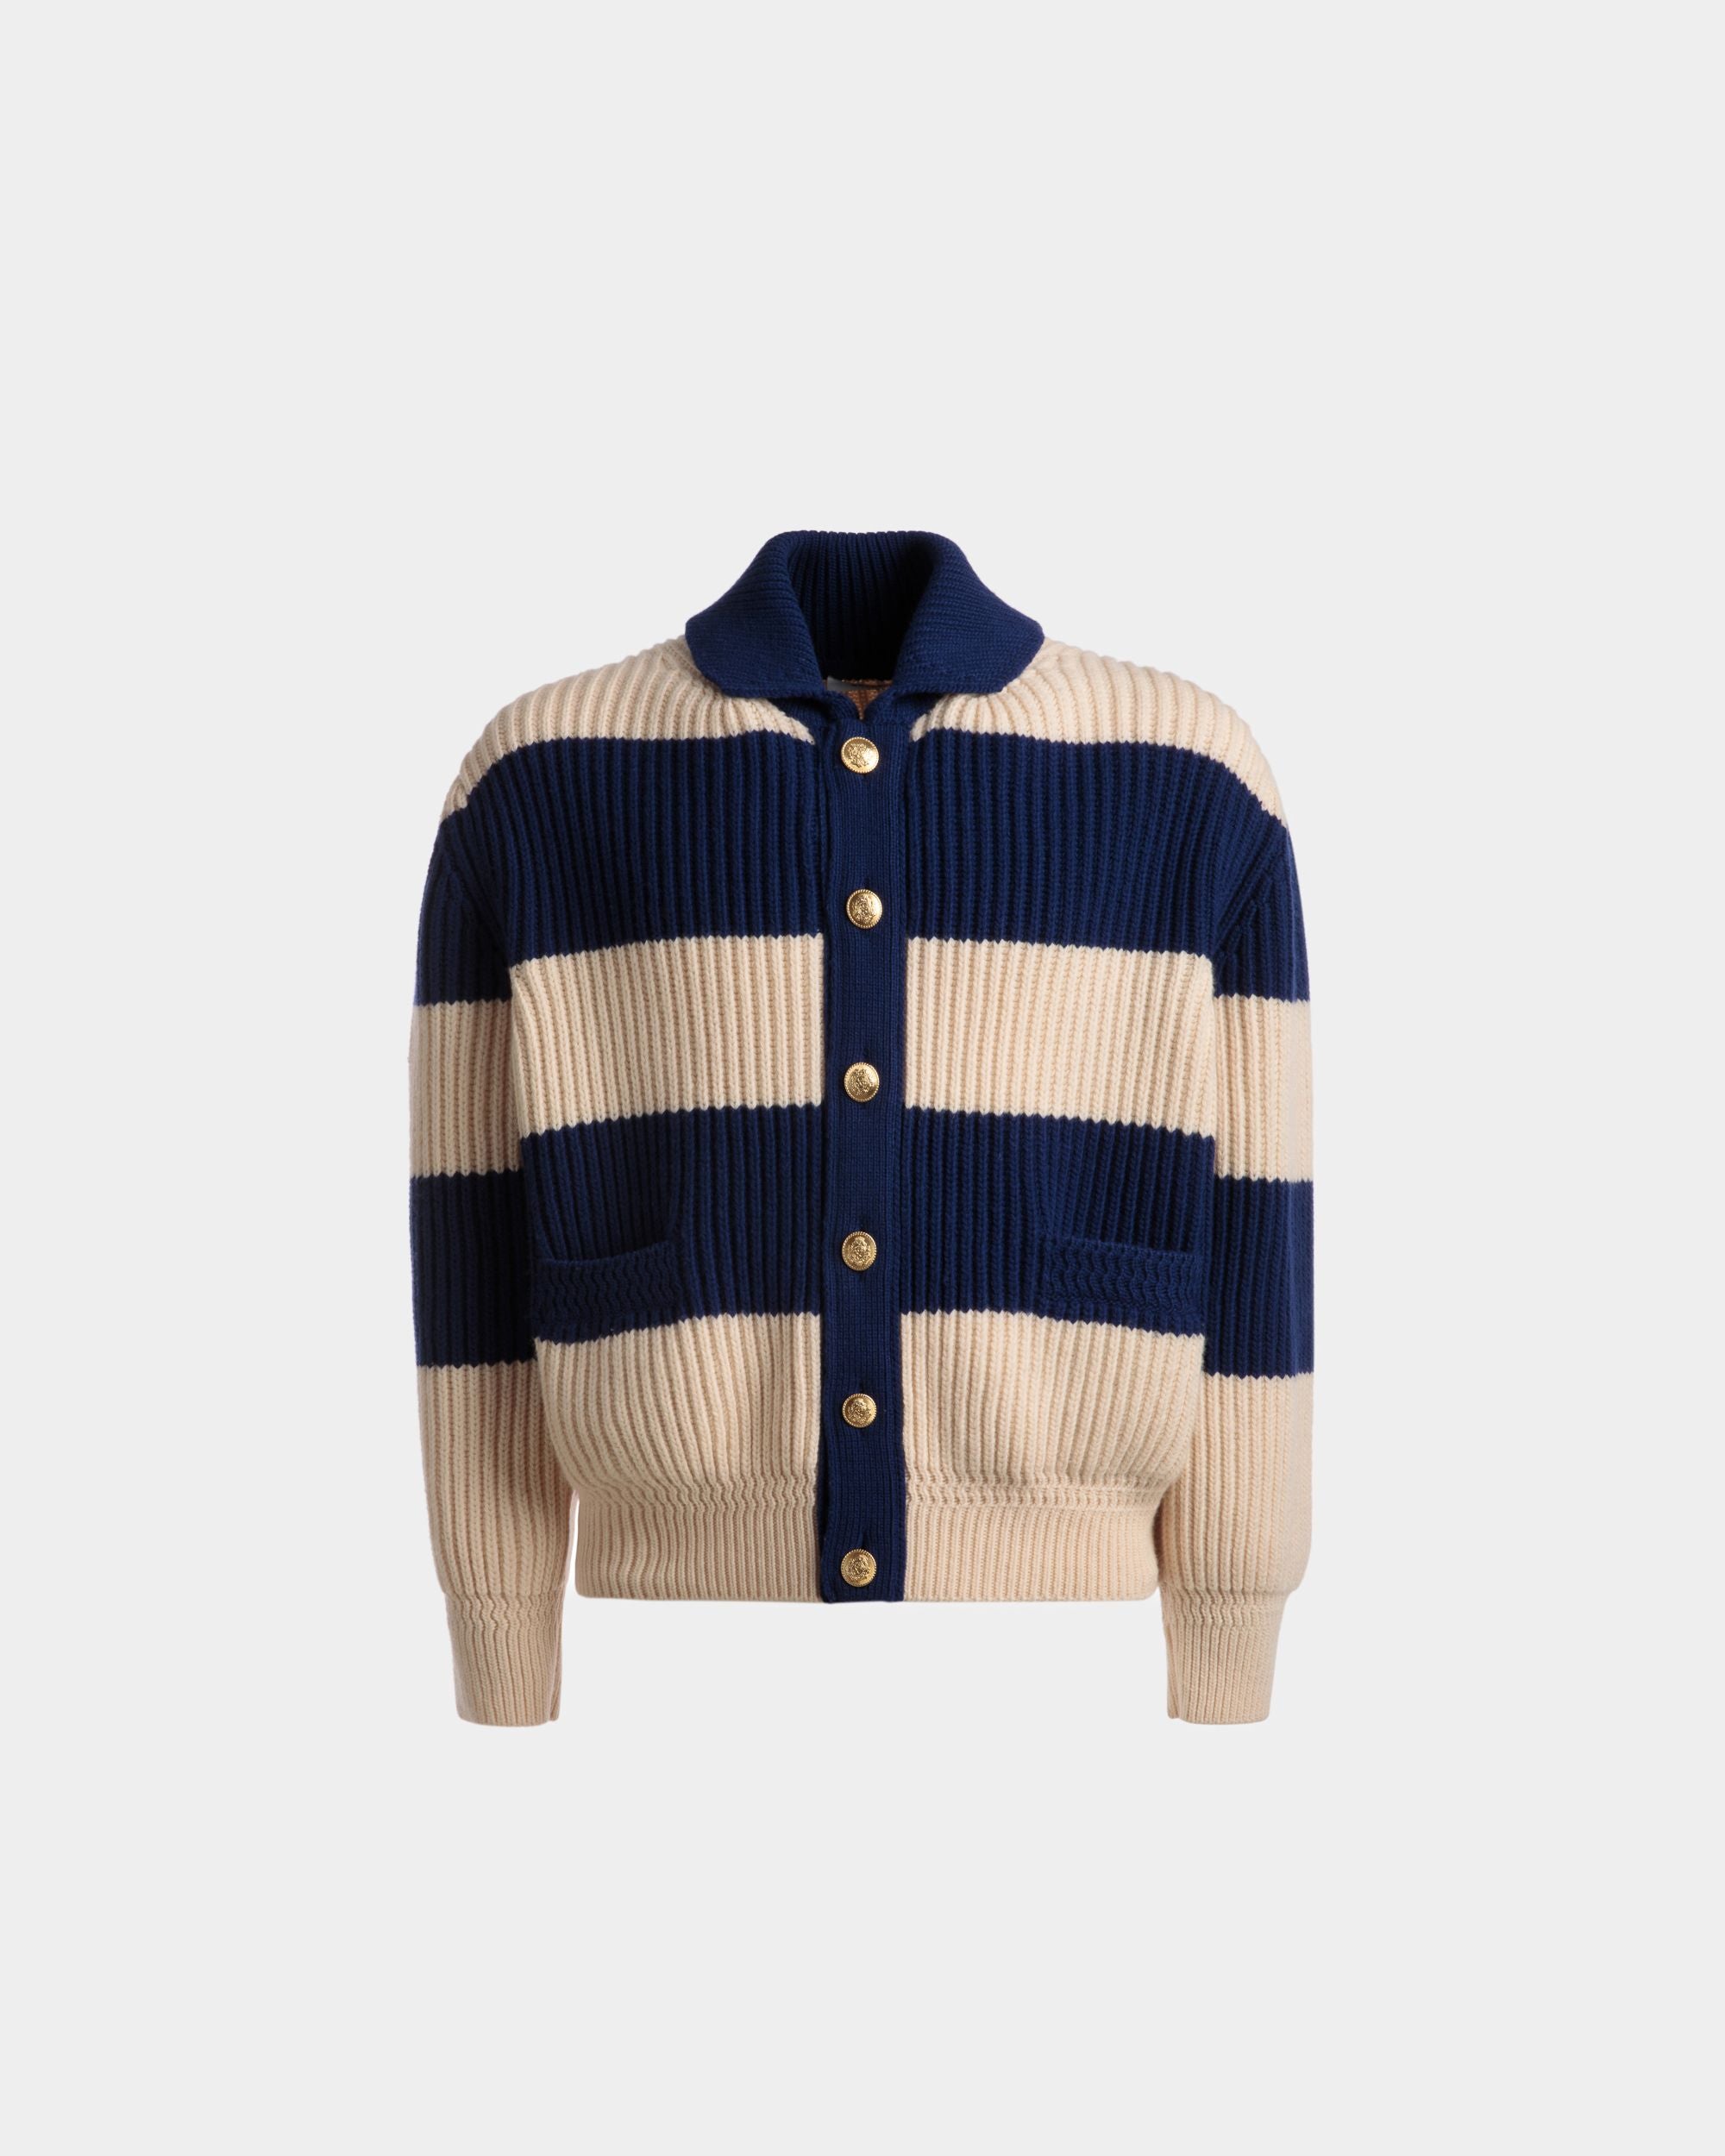 Men's Striped Cardigan In Bone And Marine Wool | Bally | Still Life Front